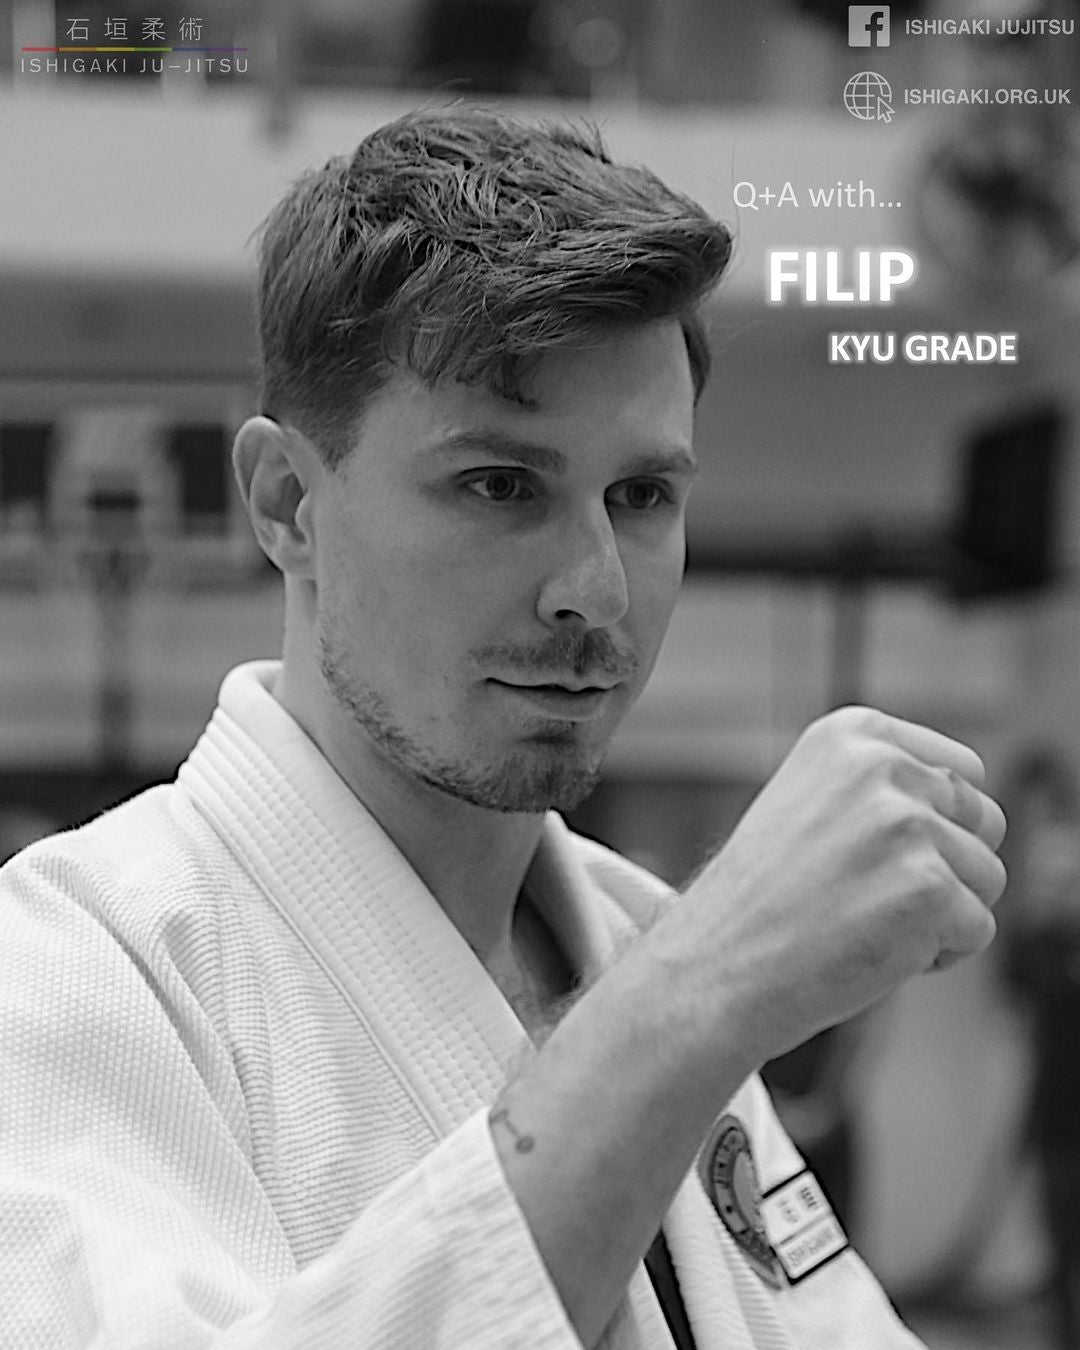 Q&A with Members: Filip